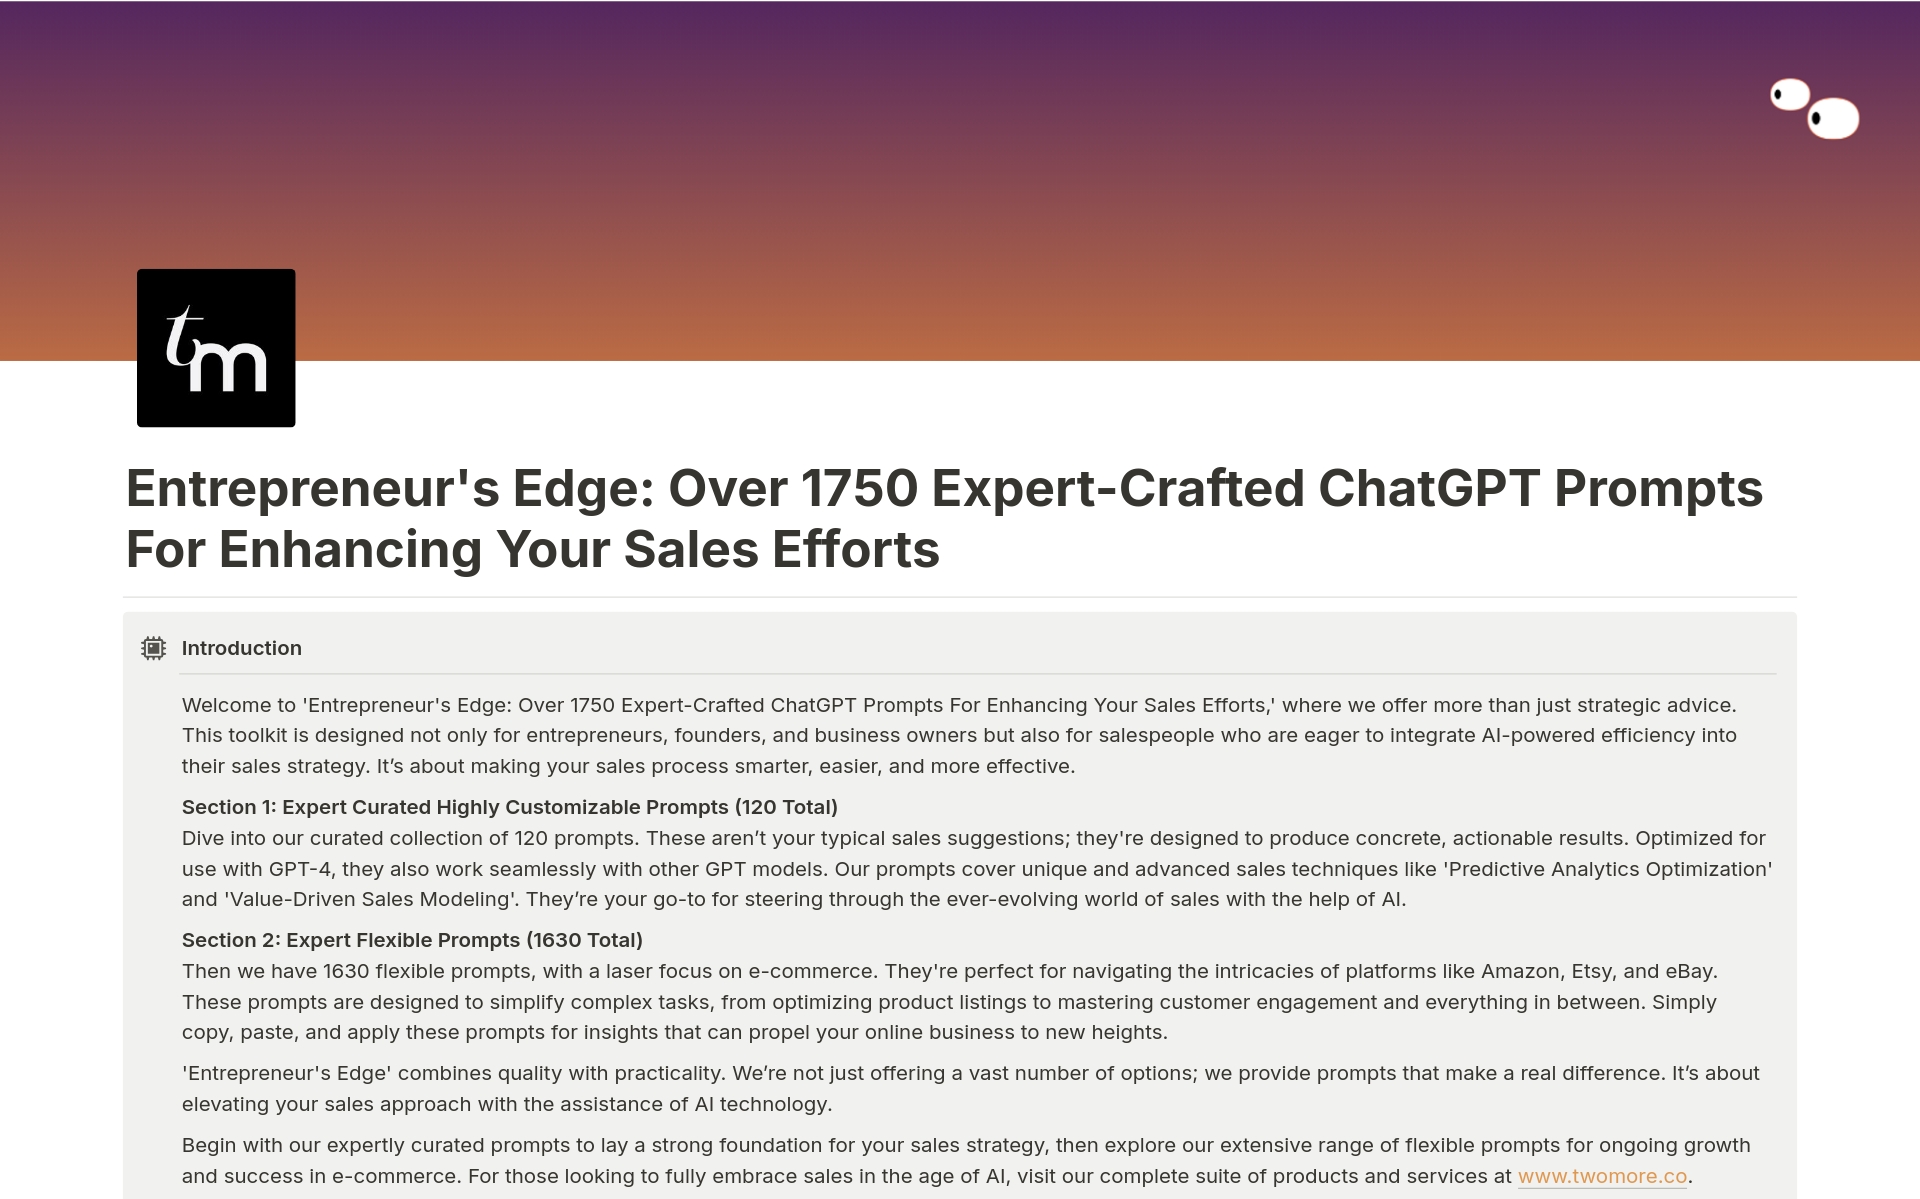 Entrepreneur's Edge - Sales Edition is an essential Notion document that supercharges your sales efforts using ChatGPT technology. It equips entrepreneurs and business owners with over 1750 expert-crafted prompts to develop sales strategies and drive growth.